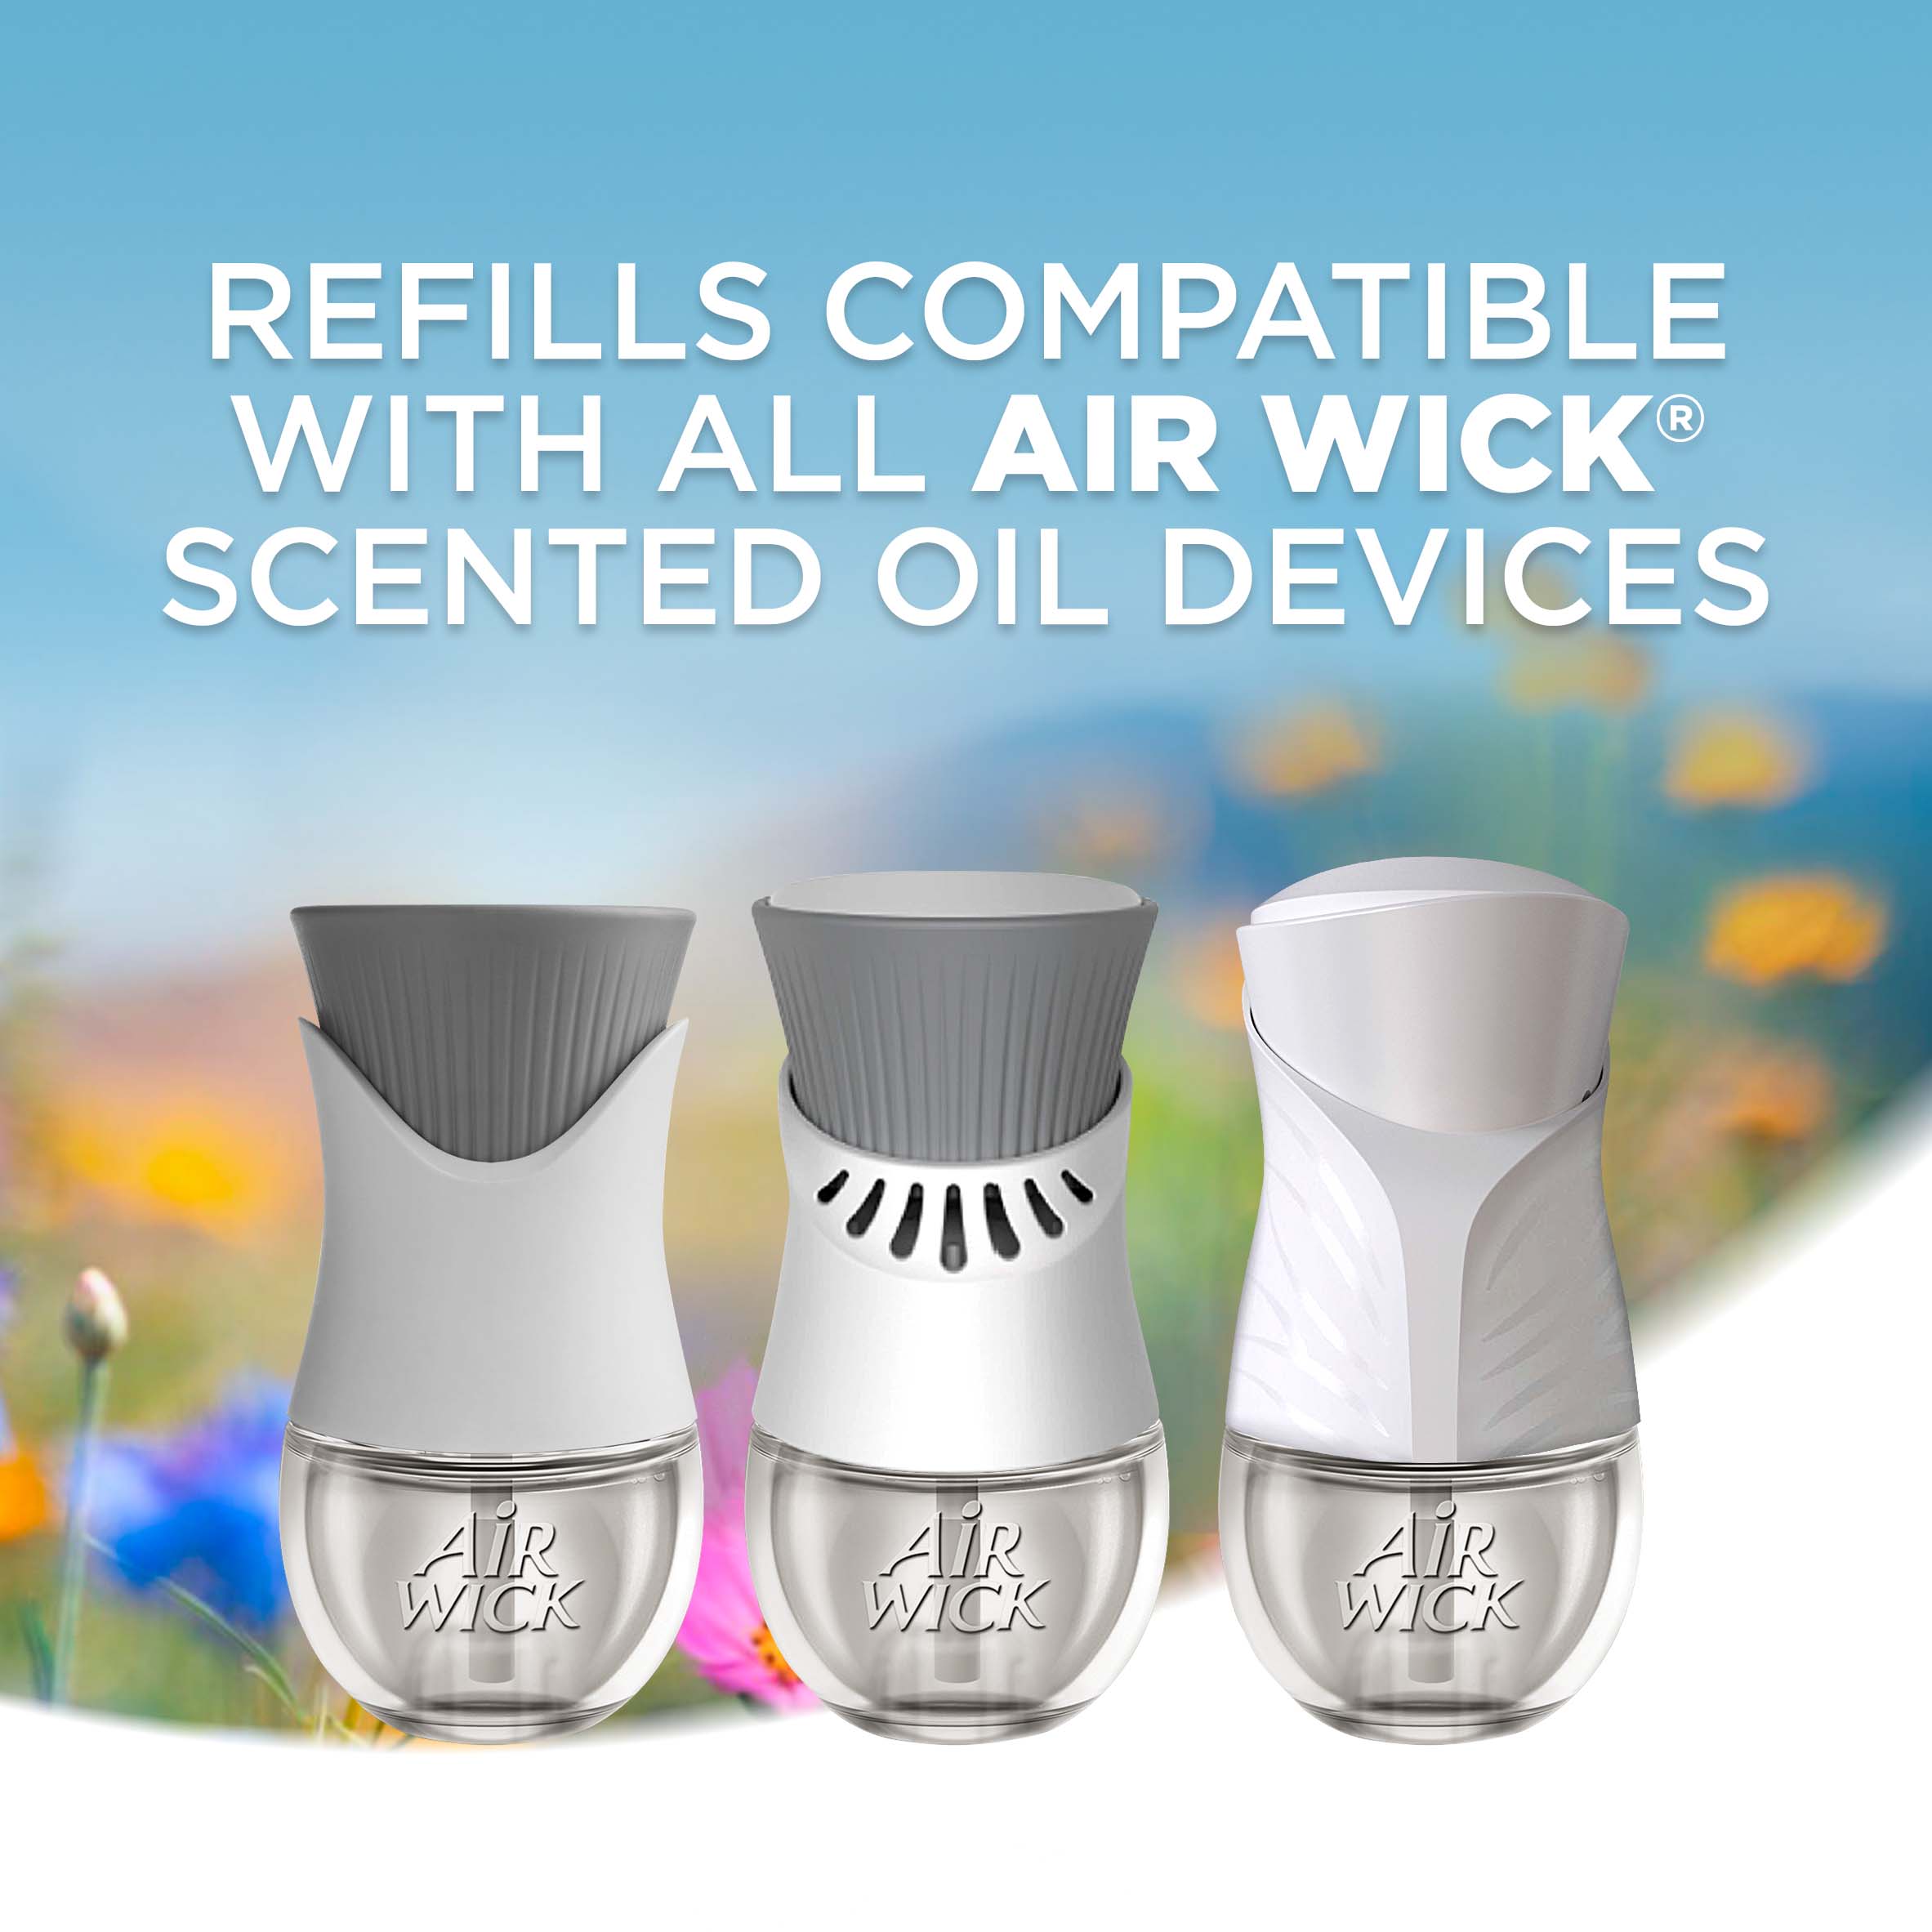 Air Wick Plug in Scented Oil Starter Kit (Warmer + 1 Refill), Hawaii, Air Freshener, Essential Oils - image 5 of 9